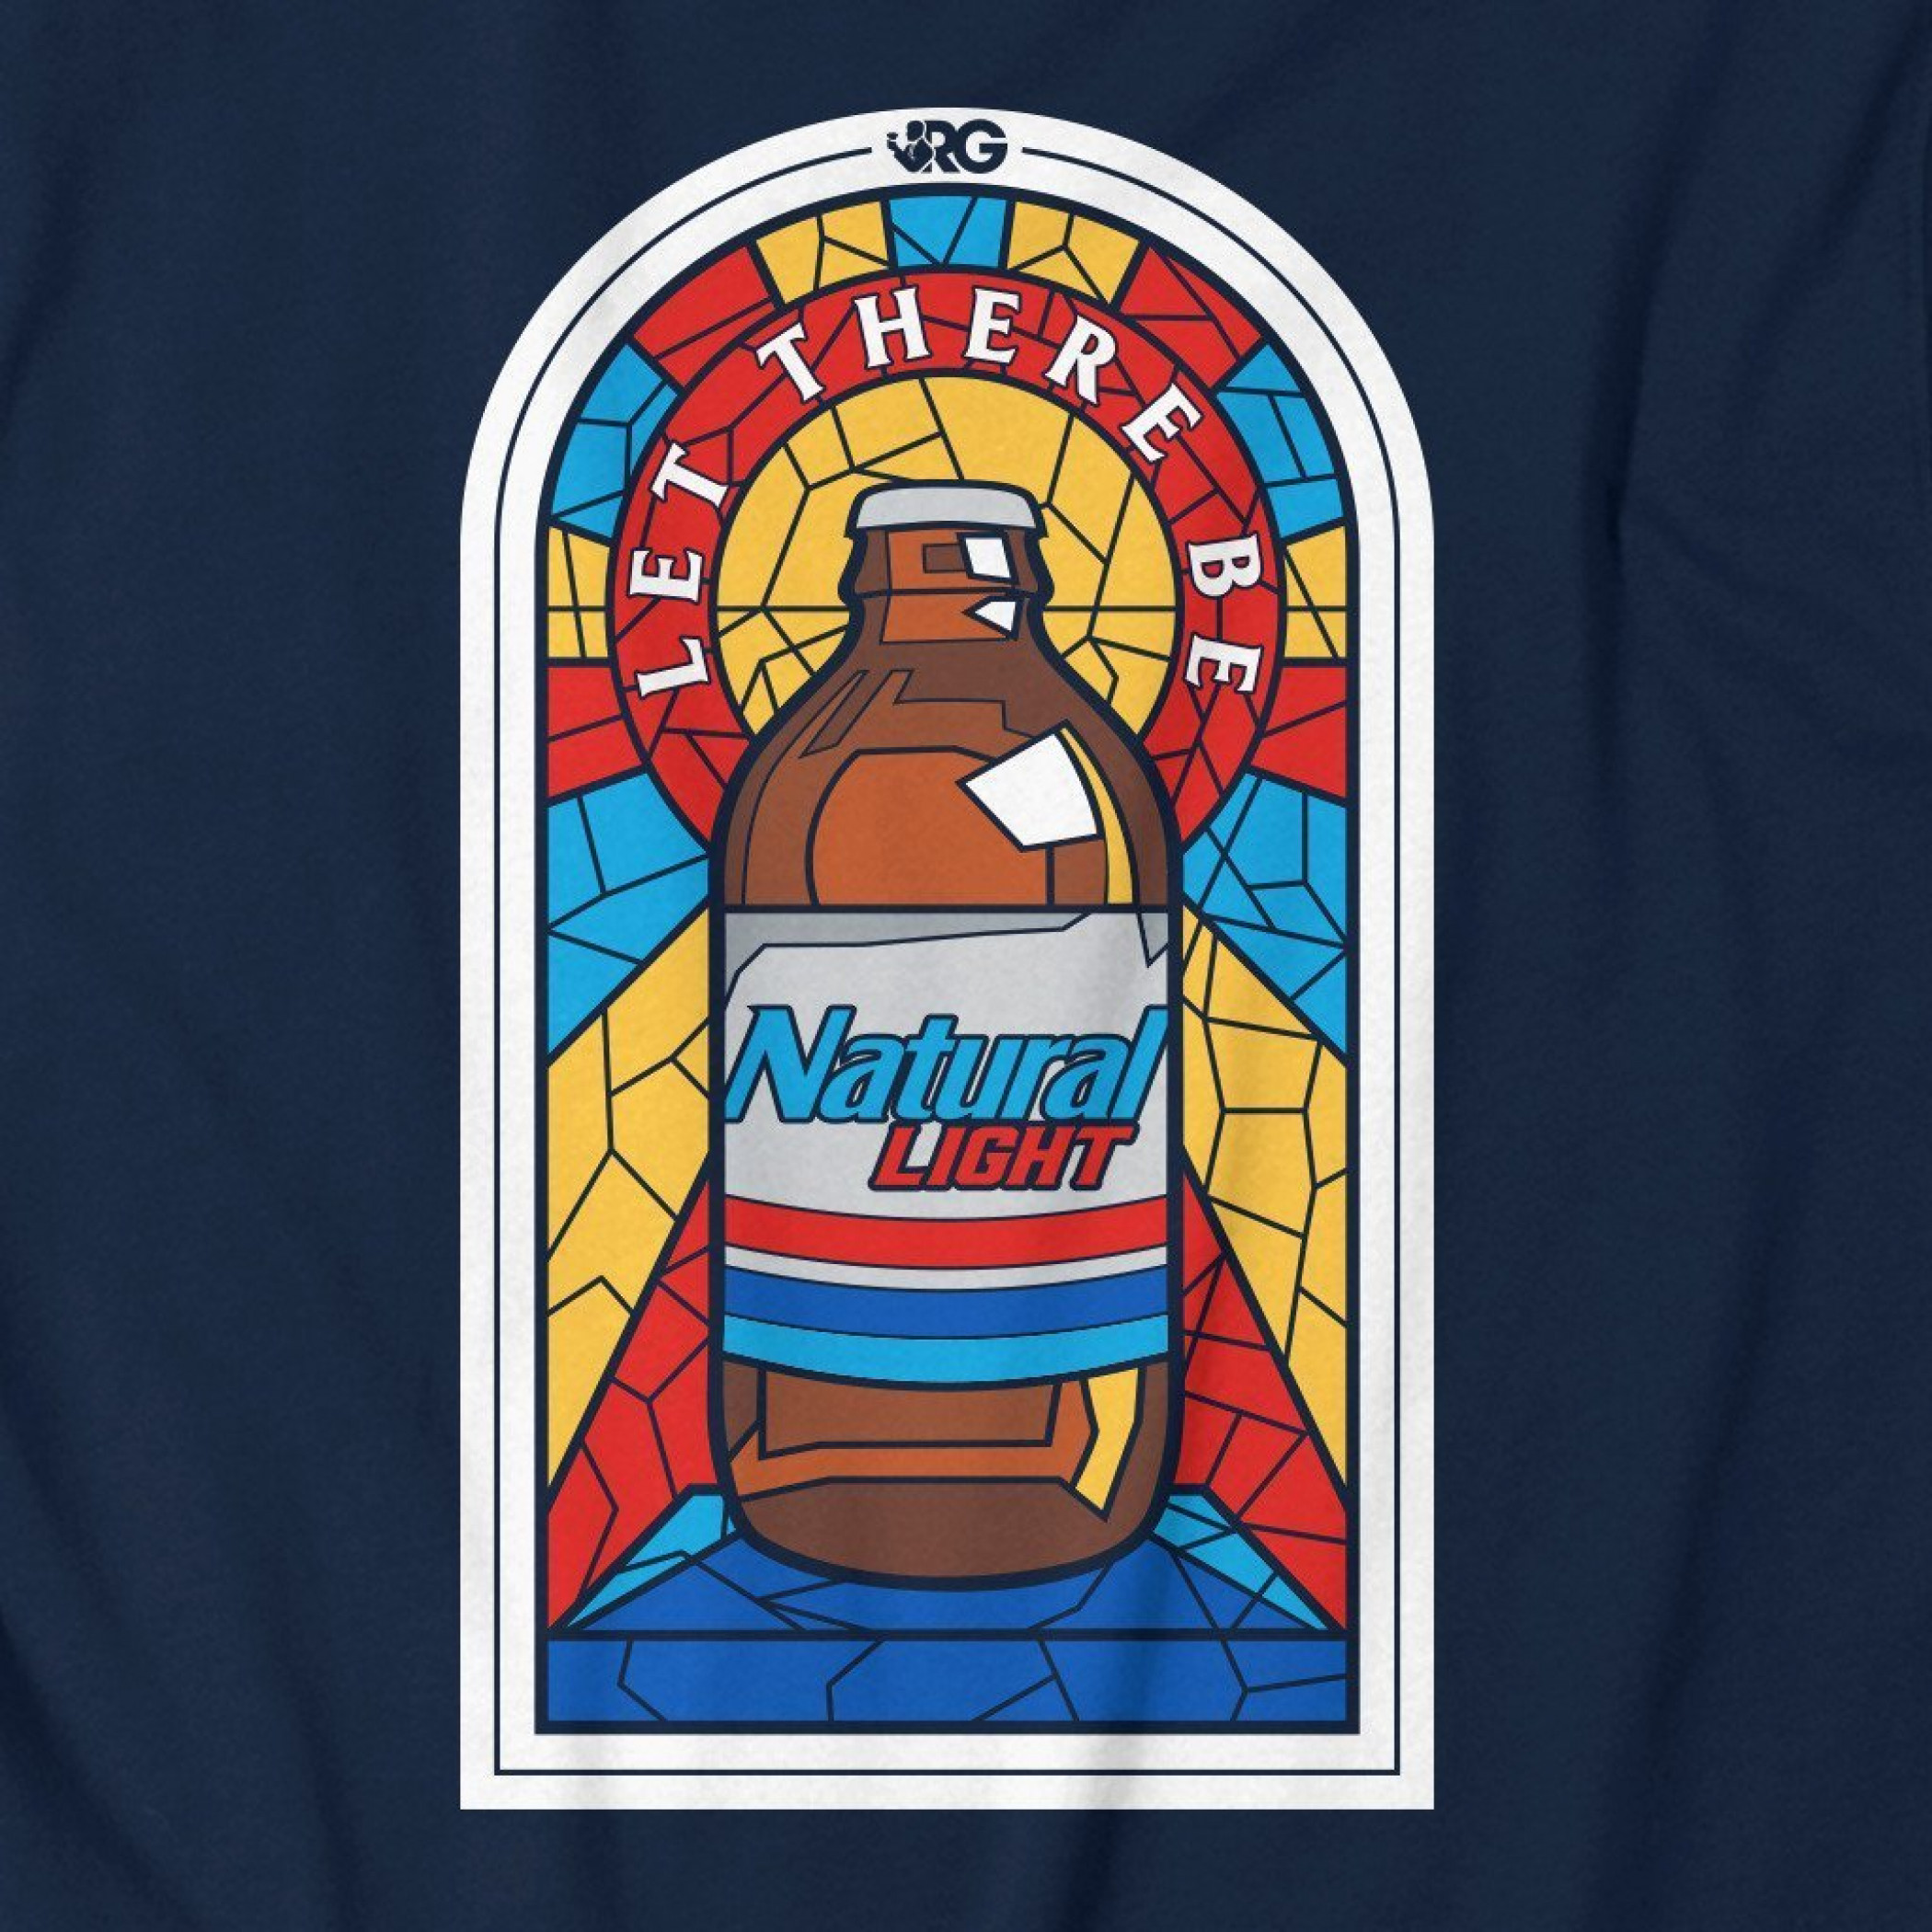 Let There Be Natty Light